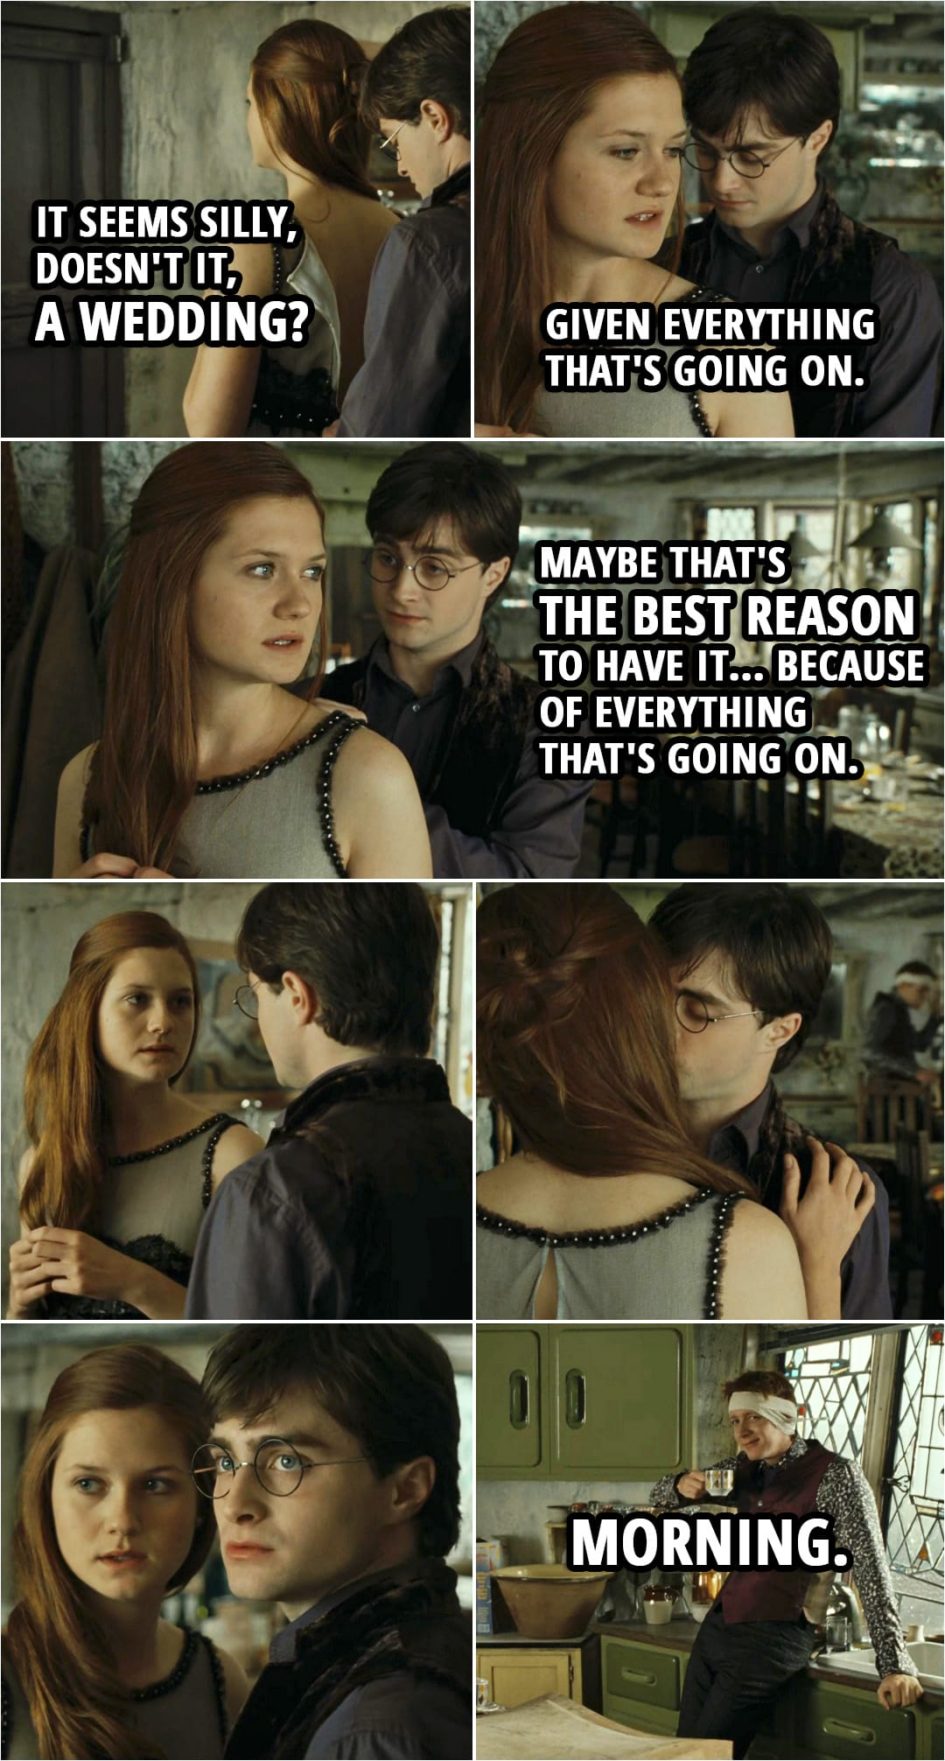 Quote from Harry Potter and the Deathly Hallows: Part 1 (2010) | Ginny Weasley: It seems silly, doesn't it, a wedding? Given everything that's going on. Harry Potter: Maybe that's the best reason to have it... because of everything that's going on. (Ginny and Harry kiss. George sneaks in...) George Weasley: Morning.